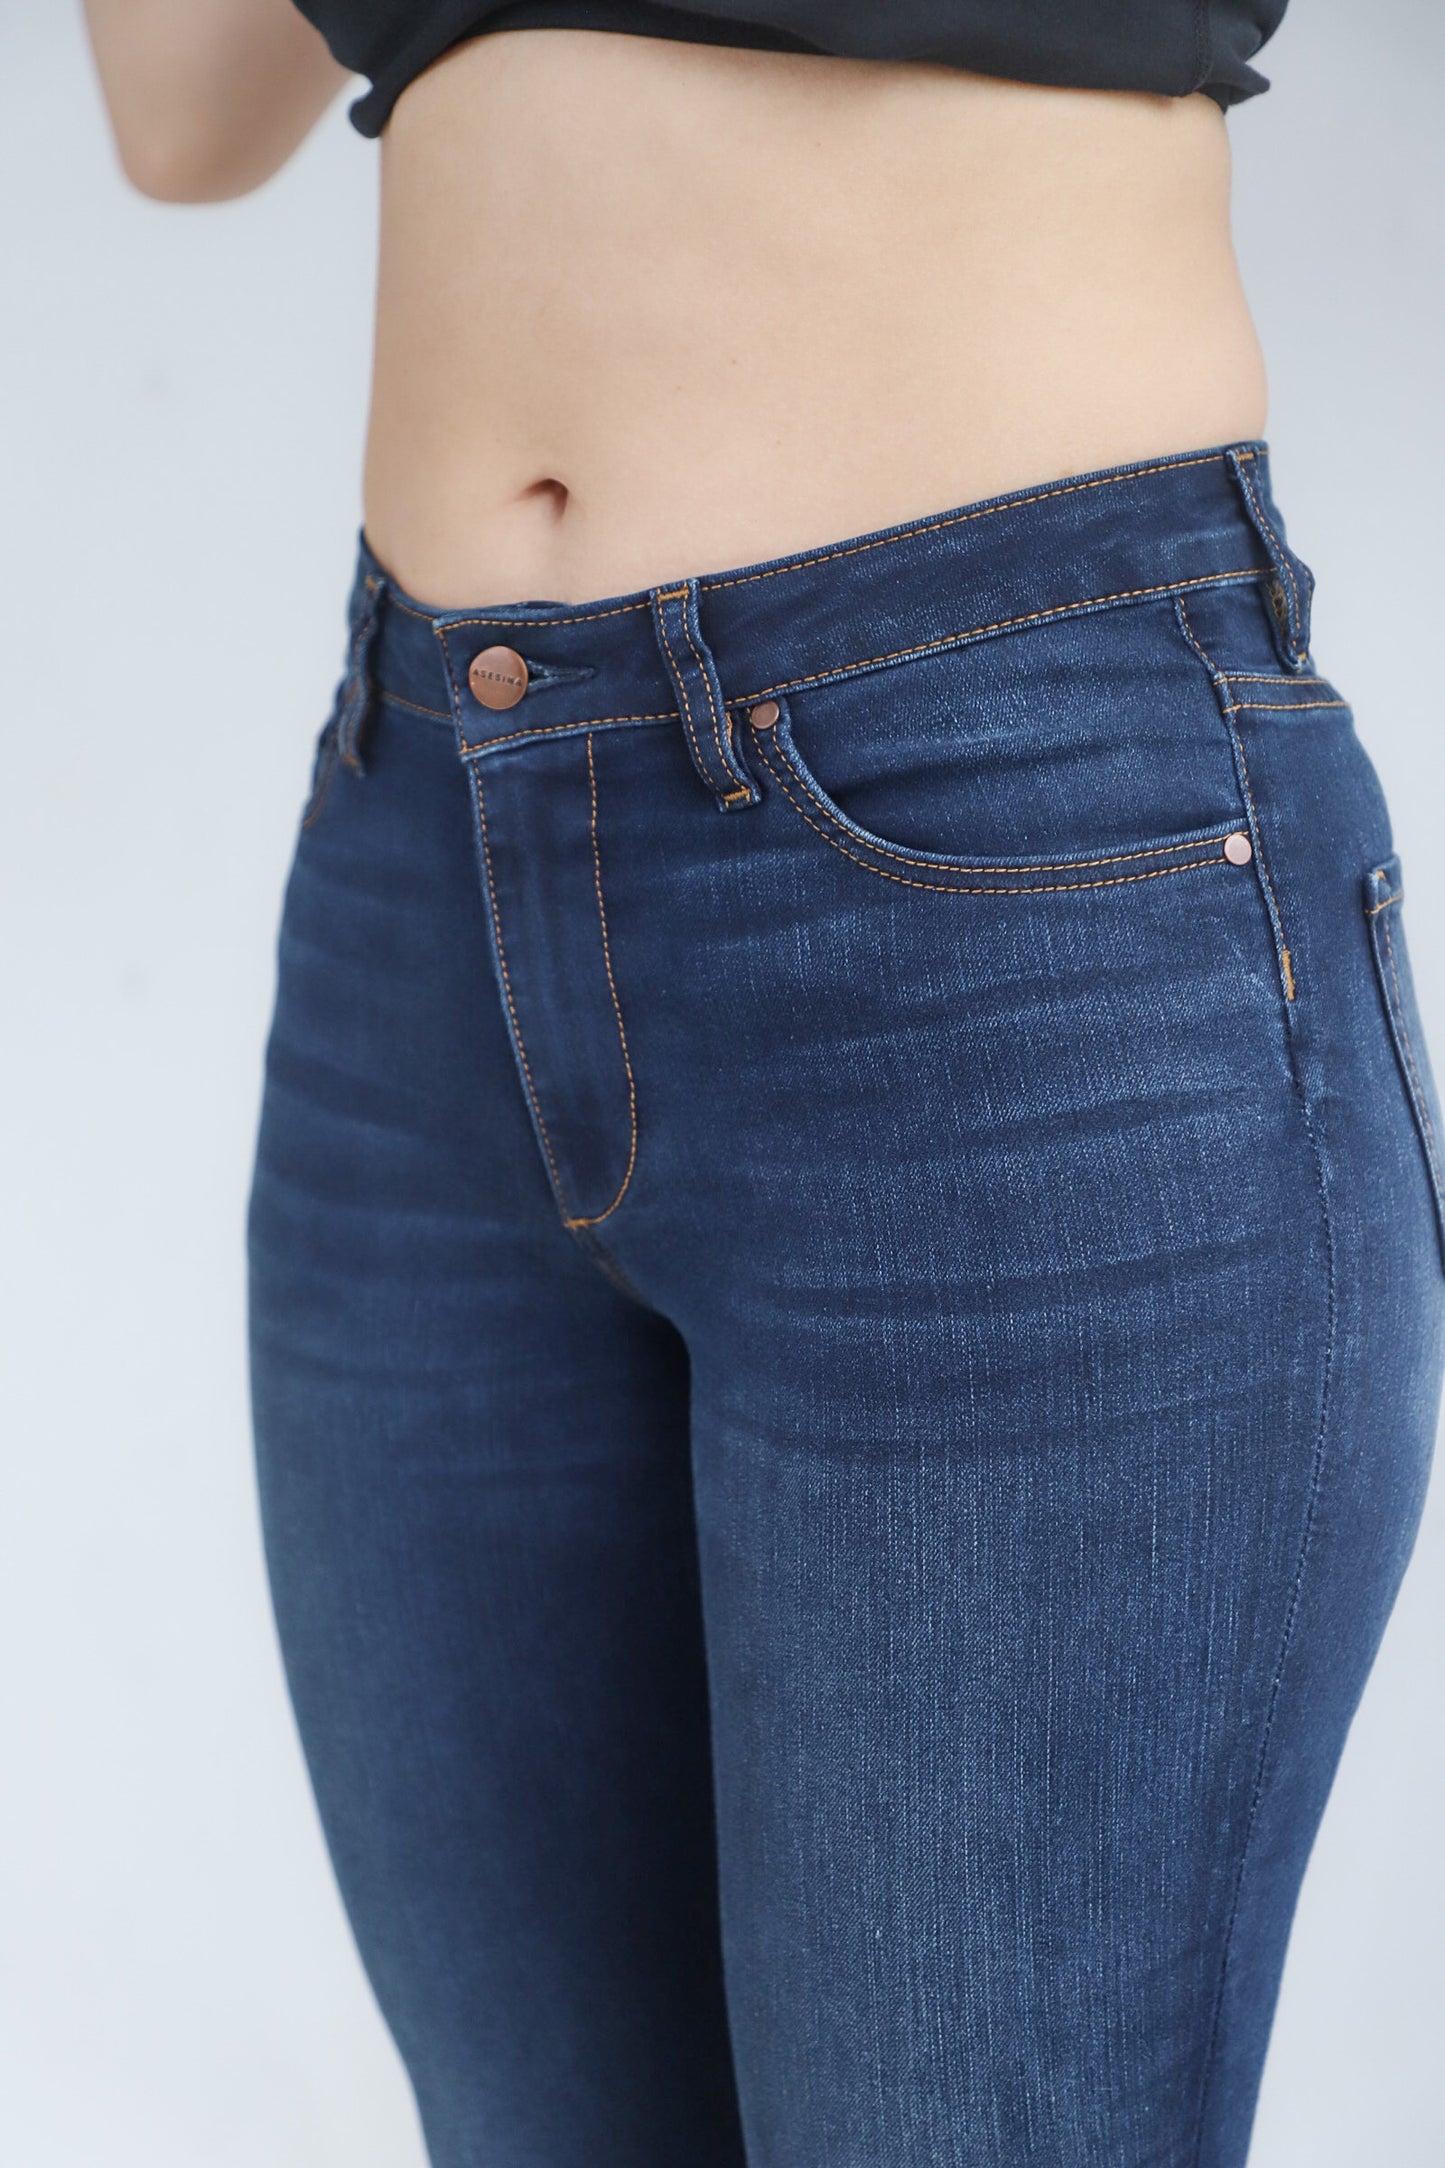 Close up picture of the Power Jeans showing how the jeans fit the hips and do not gap at the waist. Made for the athletic body.